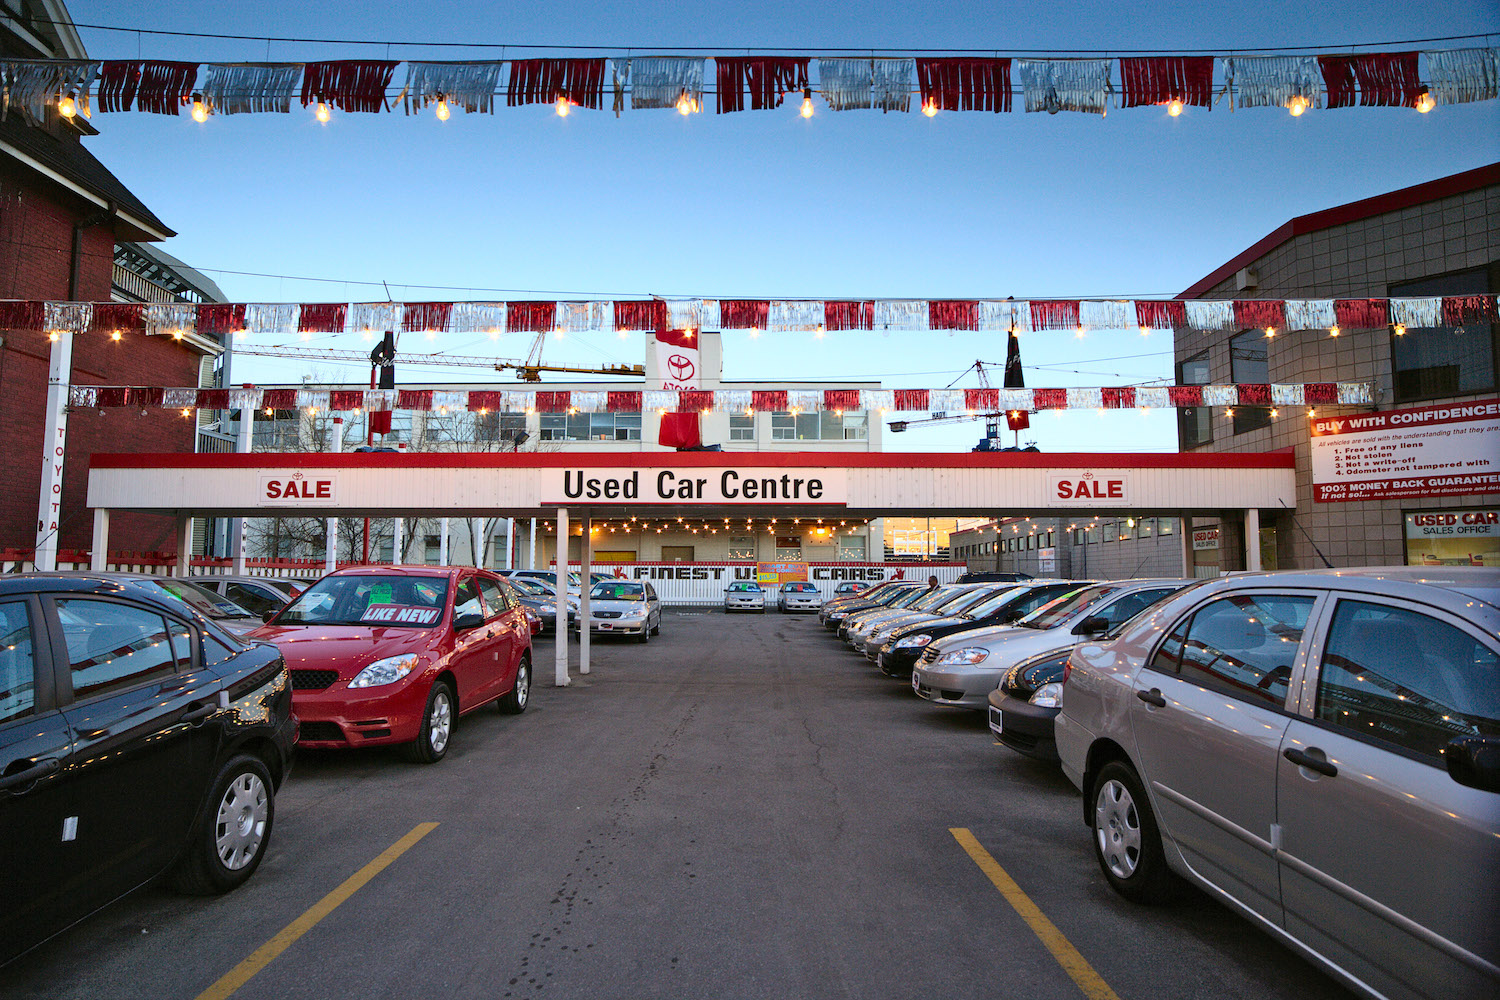 Rows of used cars parked in the lot outside a dealership with red and white banners and a Toyota sign visible in the background.